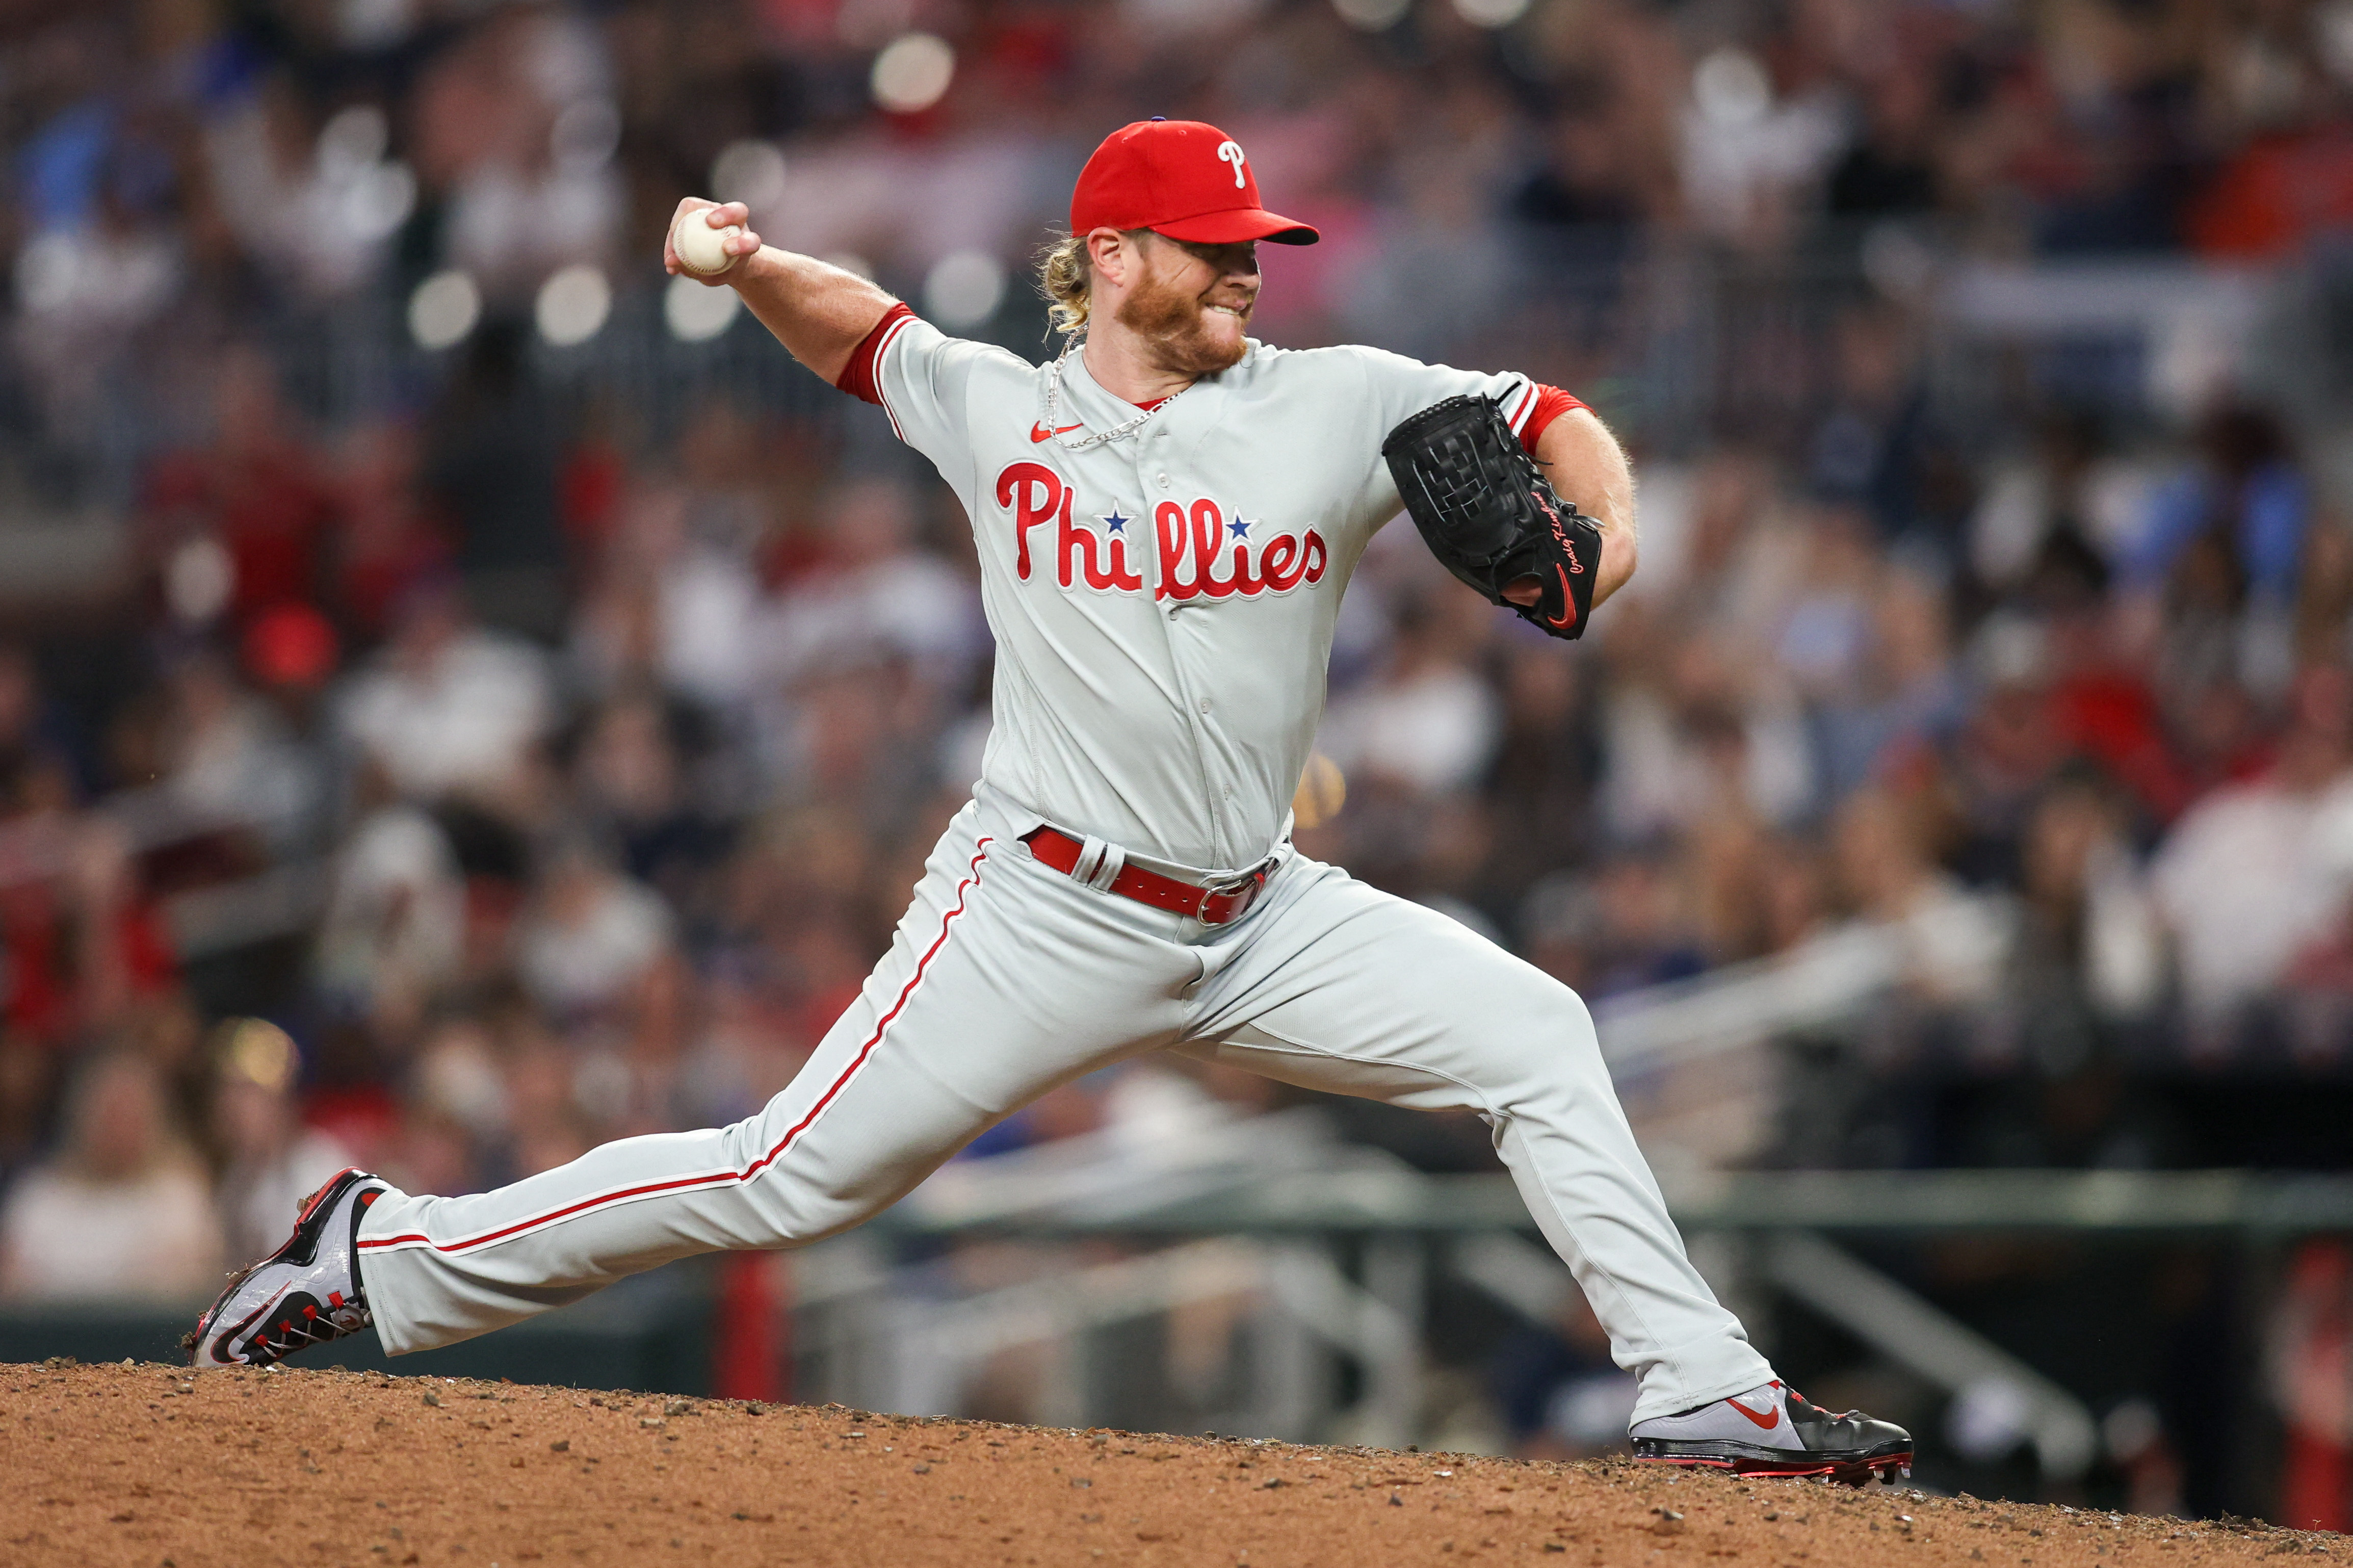 Craig Kimbrel earns career save No. 400 as Phillies defeat Braves   Phillies Nation - Your source for Philadelphia Phillies news, opinion,  history, rumors, events, and other fun stuff.